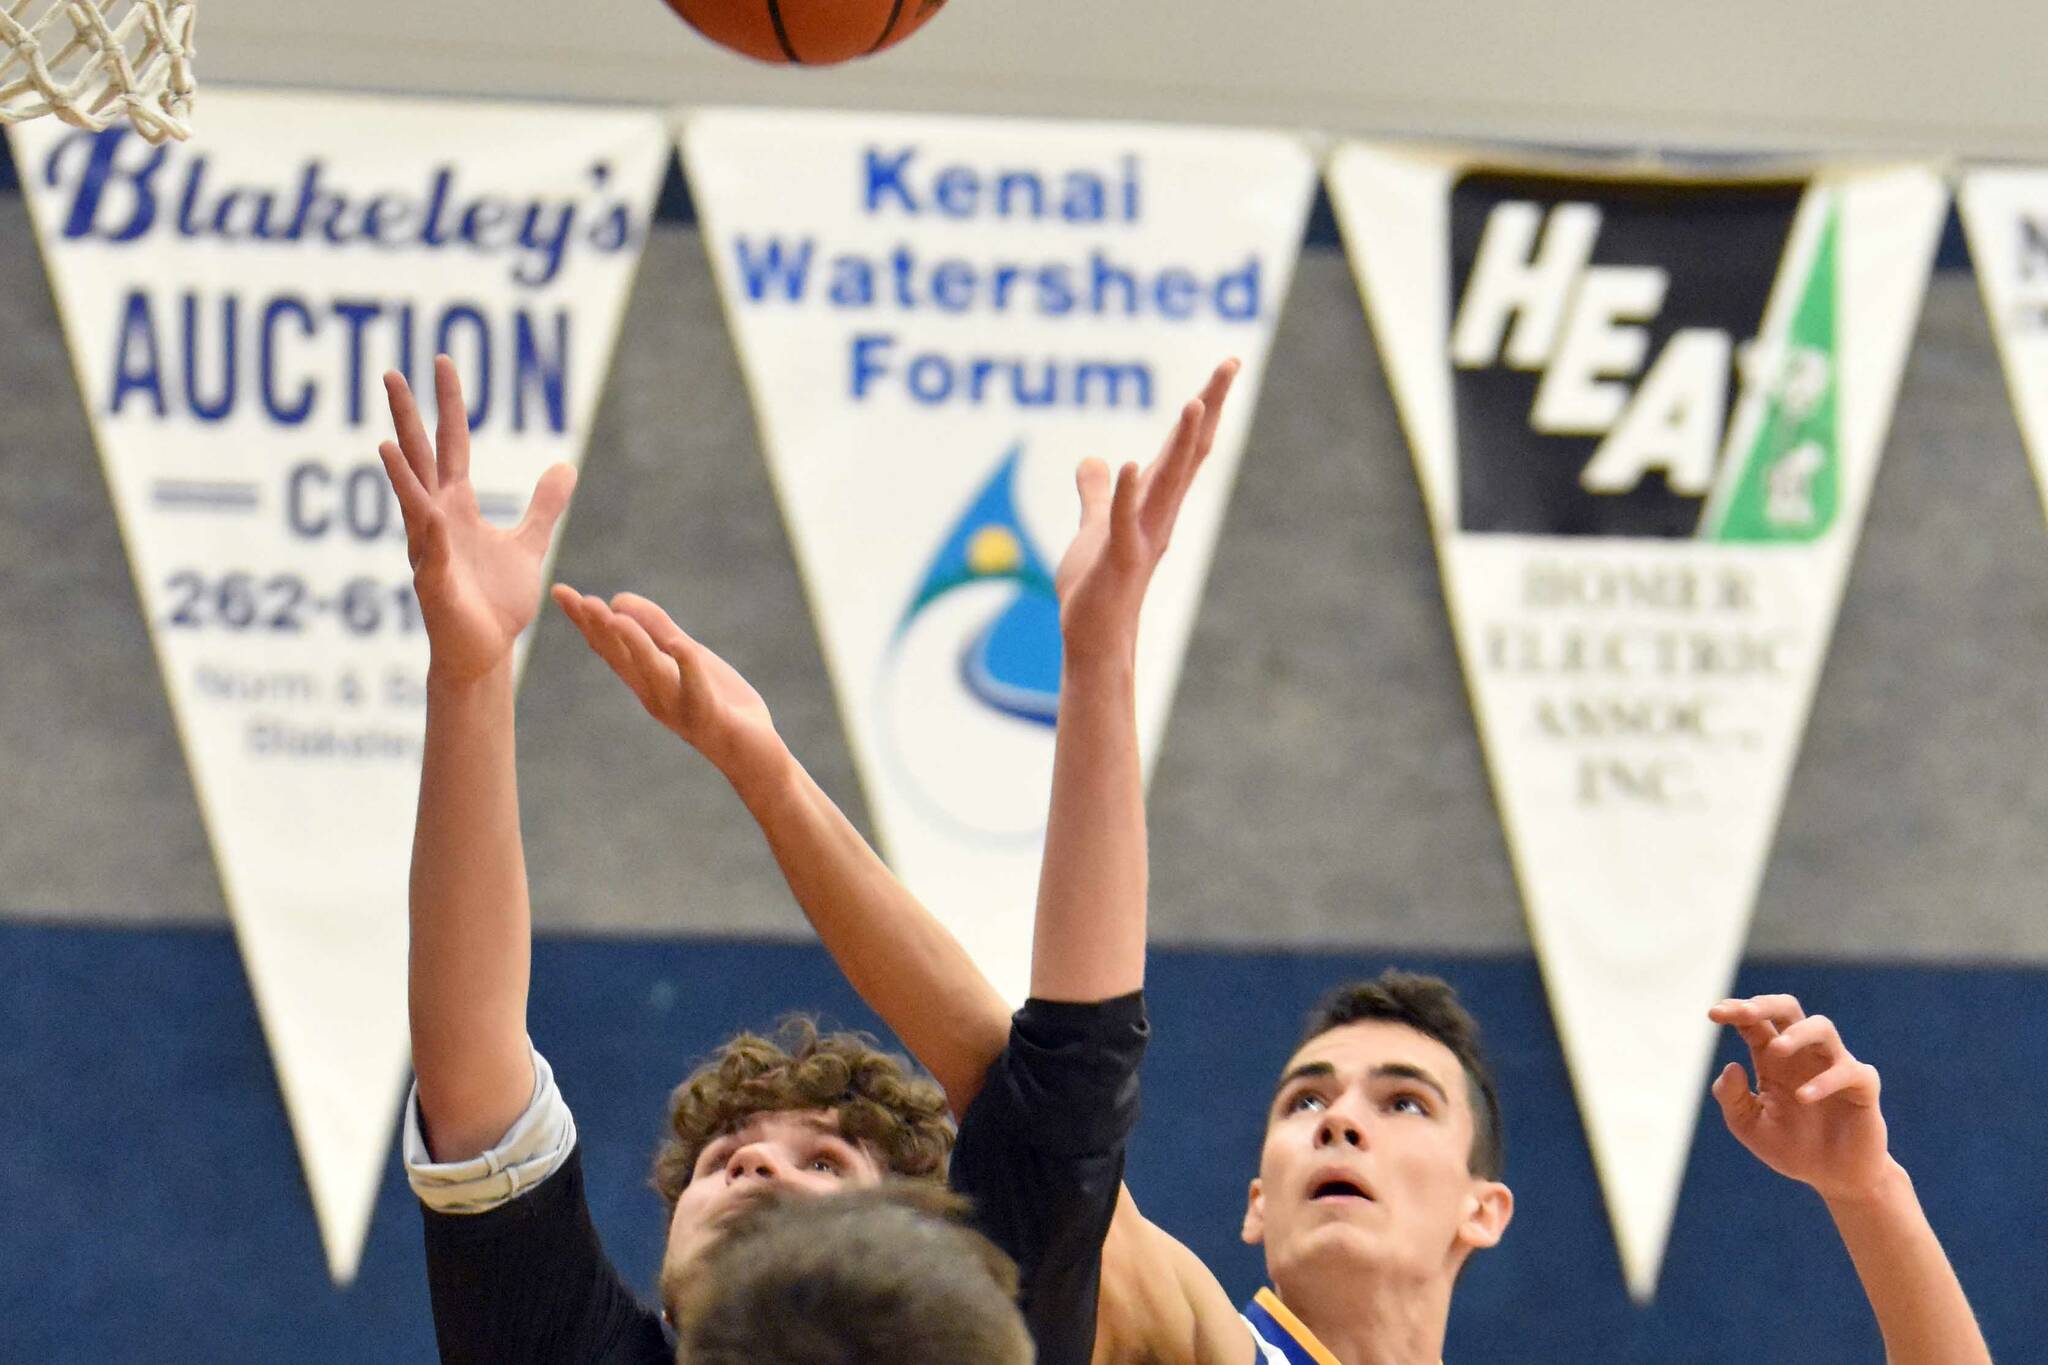 Cook Inlet Academy sophomore Ian McGarry battles for a rebound against Birchwood Christian on Saturday, Jan. 21, 2023, at Cook Inlet Academy just outside of Soldotna, Alaska. (Photo by Jeff Helminiak/Peninsula Clarion)